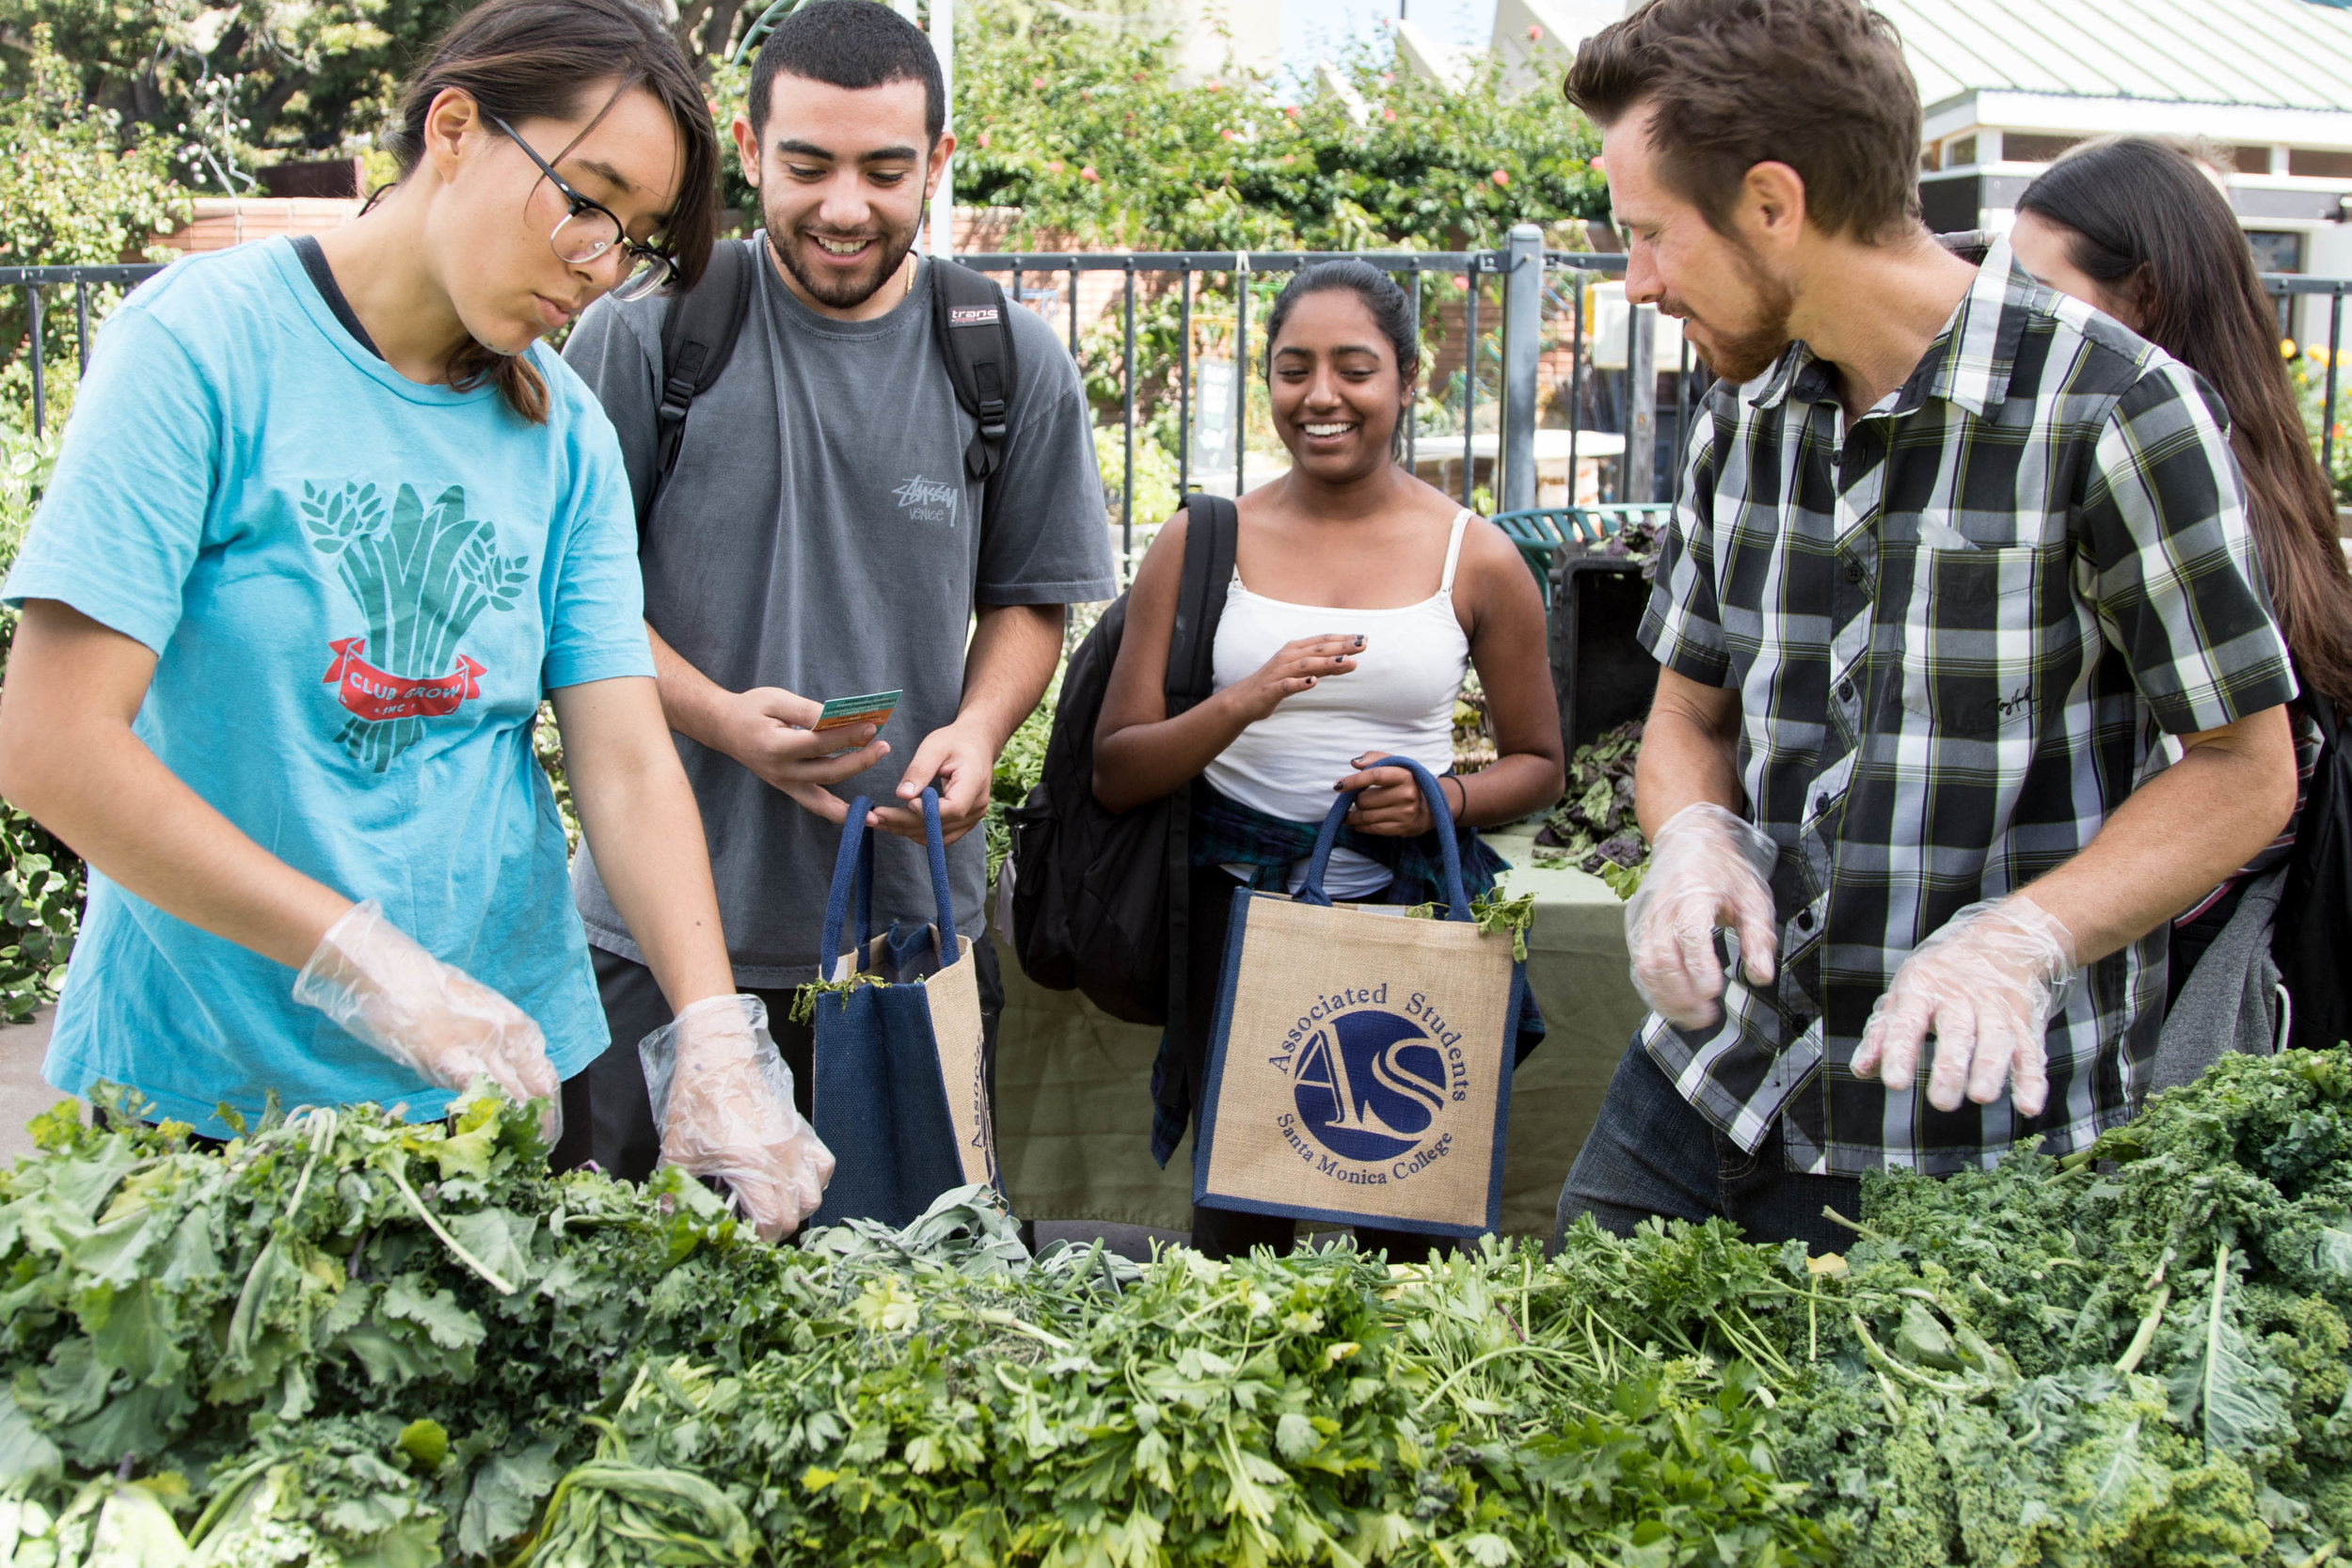  The Free Corsair Farmers Market provides students with vegetables and fruits from local Santa Monica farmers markets. On October 16, 2017 during Sustainabilty week at Santa Monica College, the market expanded their usual  smaller scale set-up that's